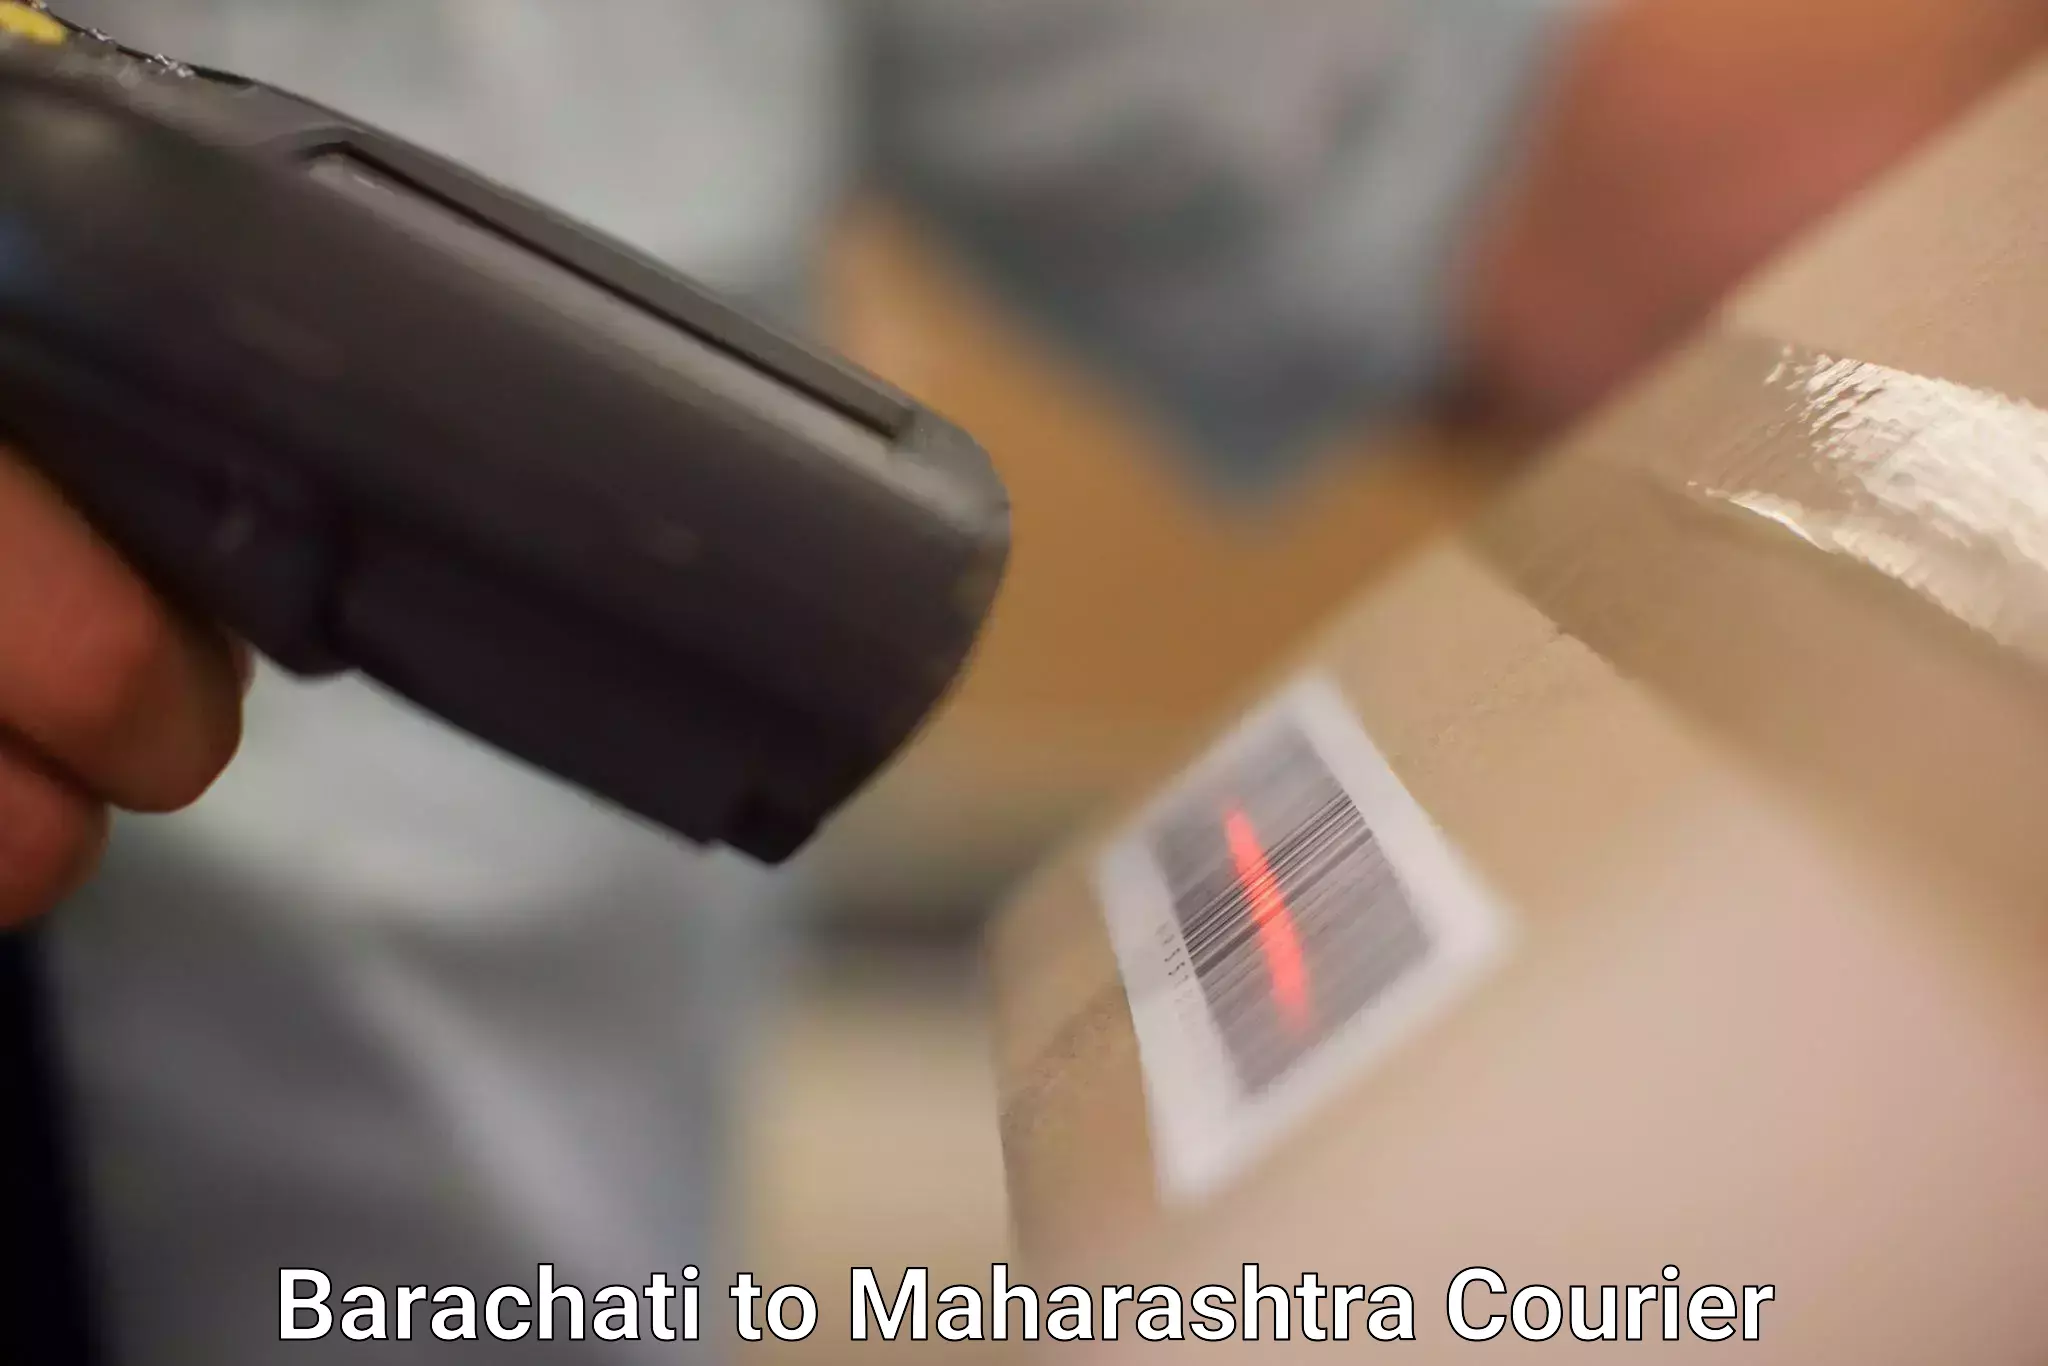 Next-day delivery options Barachati to IIT Mumbai